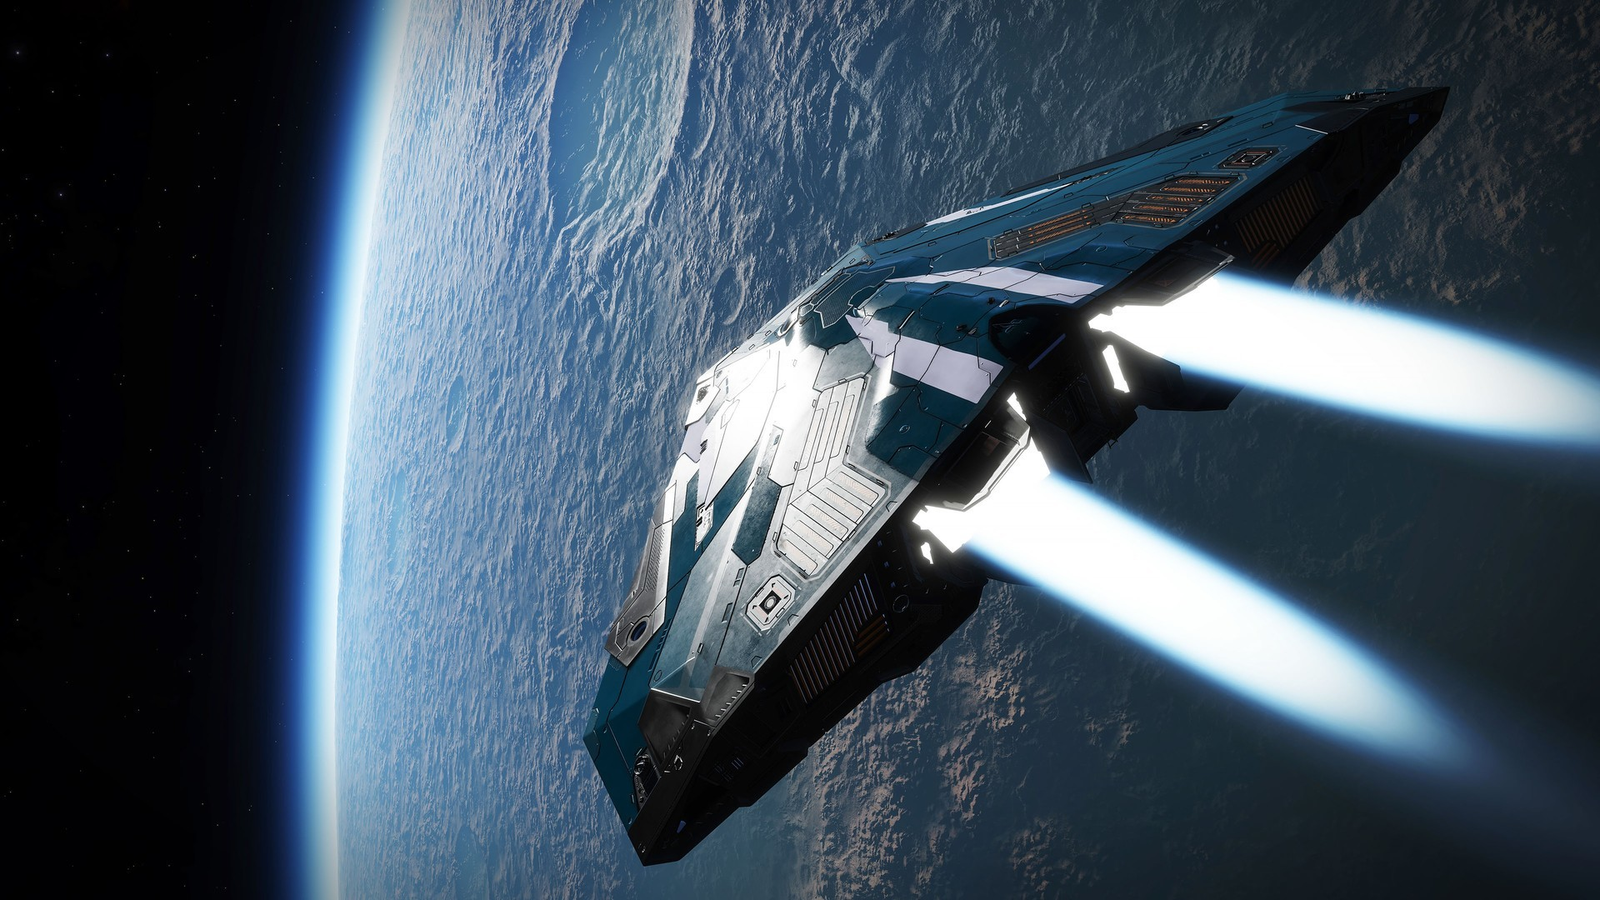 Elite Dangerous cancels Odyssey expansion and all future content on  consoles